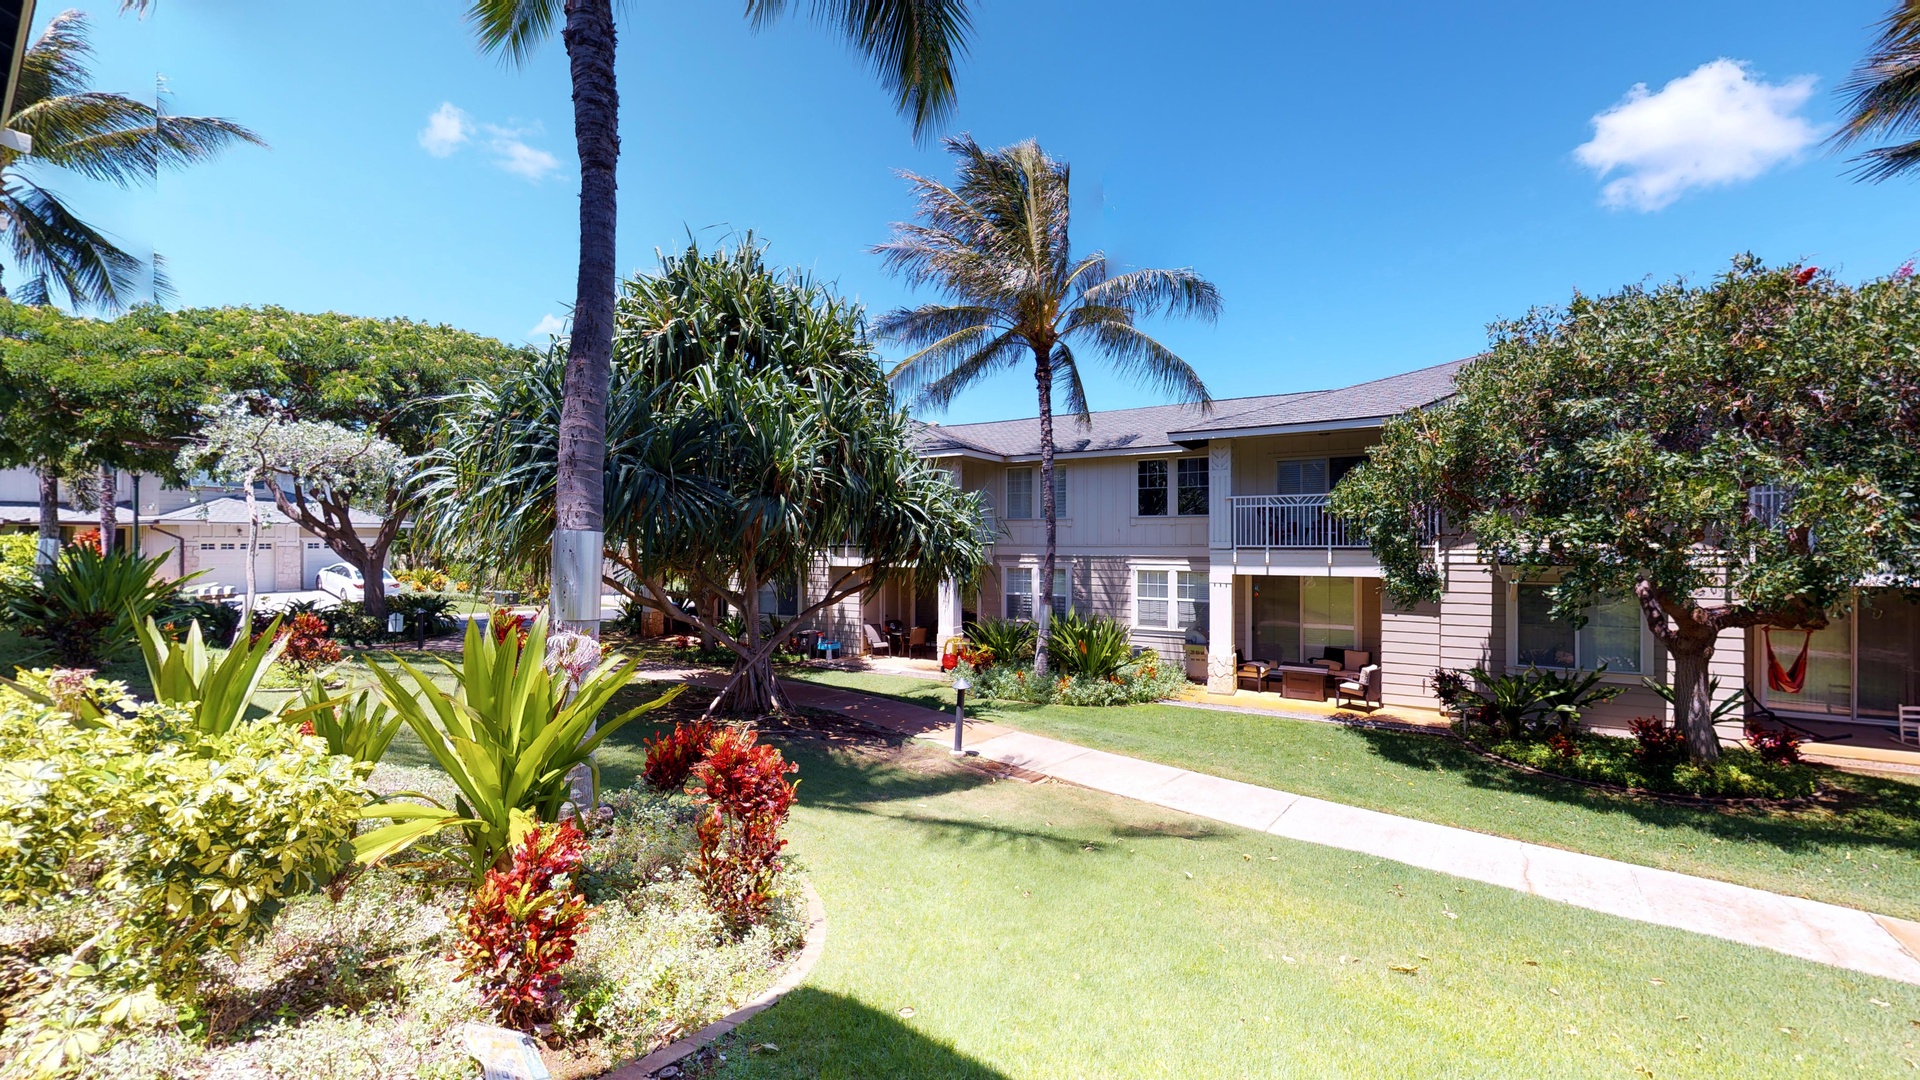 Kapolei Vacation Rentals, Ko Olina Kai 1035D - An outside view of the condo and manicured lawns.